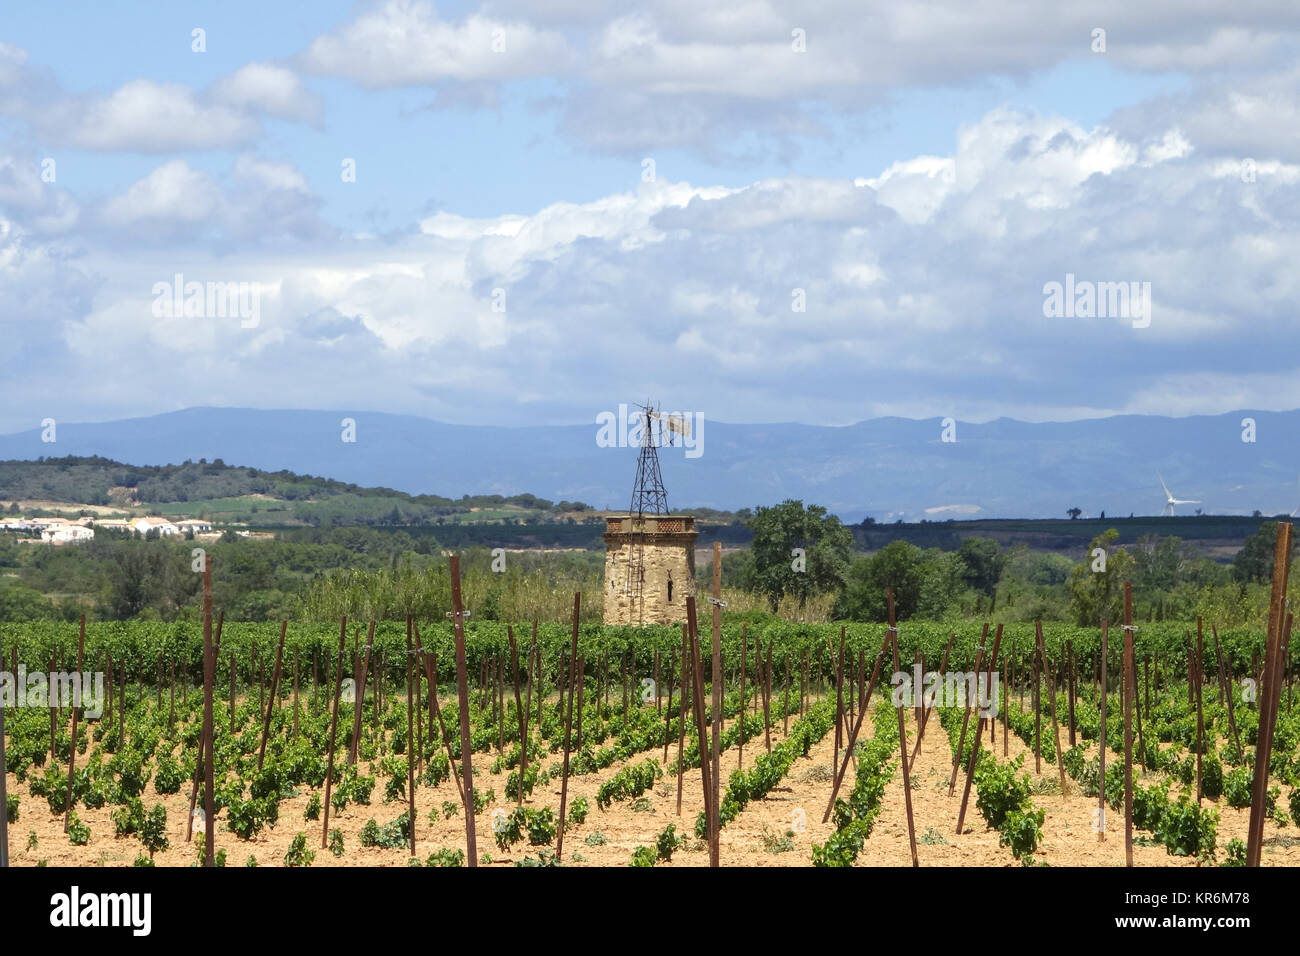 wine-growing region in southern france Stock Photo